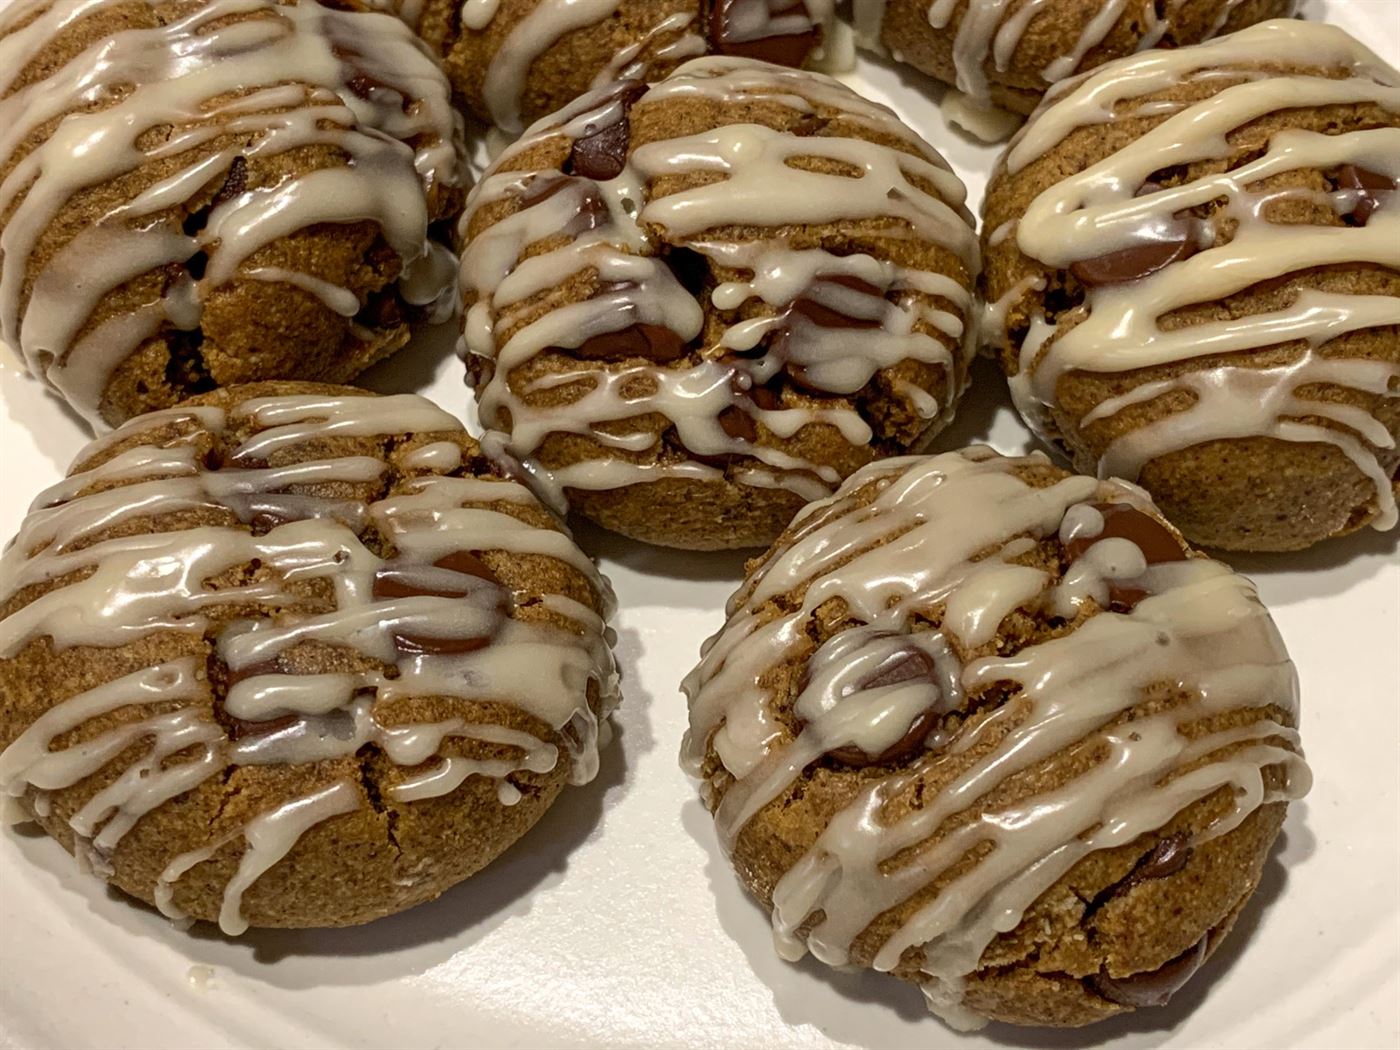 The maple drizzle elevates these cookies and tops them off with the perfect fall flavor. Samantha Bailey | The Montclarion